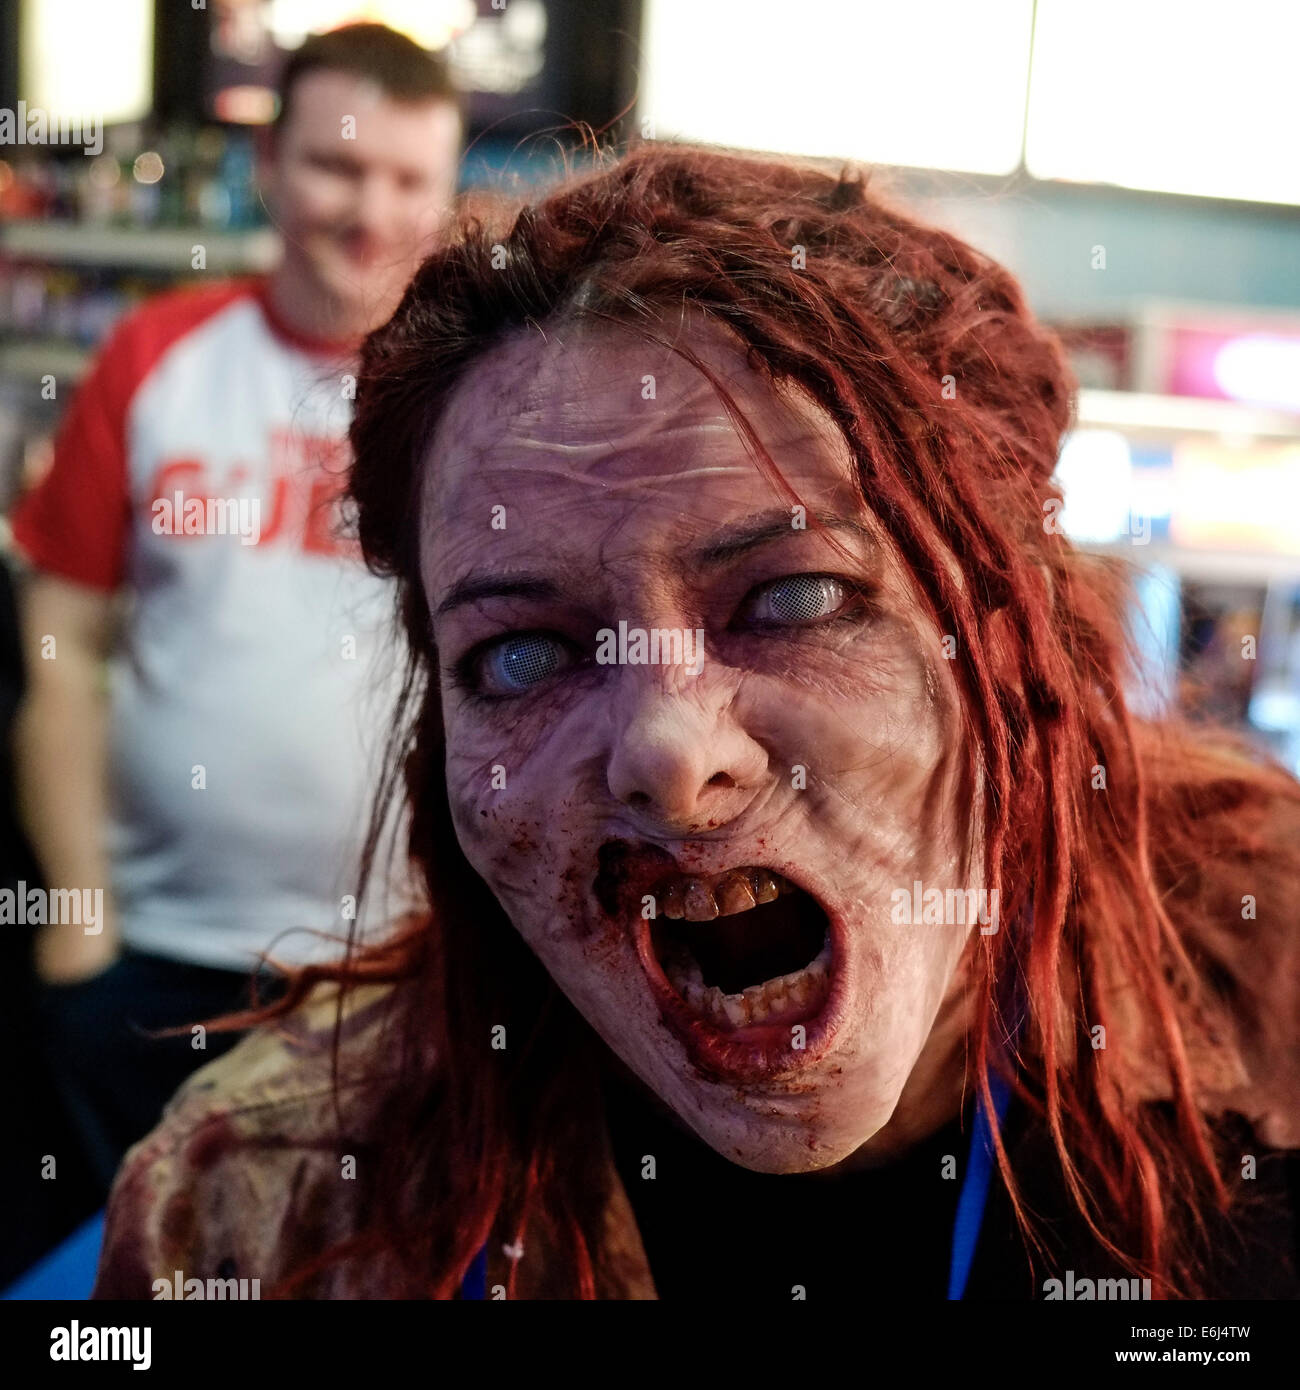 The 15th Film4 Frightfest on 24/08/2014 at The VUE West End, London. The UK premiere of Doc of the Dead, the director attends with 2 zombies. The zombies were provided by Zed Events, each actor was in make-up for 4.5 hours using a standard of prosthetics that was used in the film World War Z. Persons pictured: Zombies. Picture by Julie Edwards Stock Photo